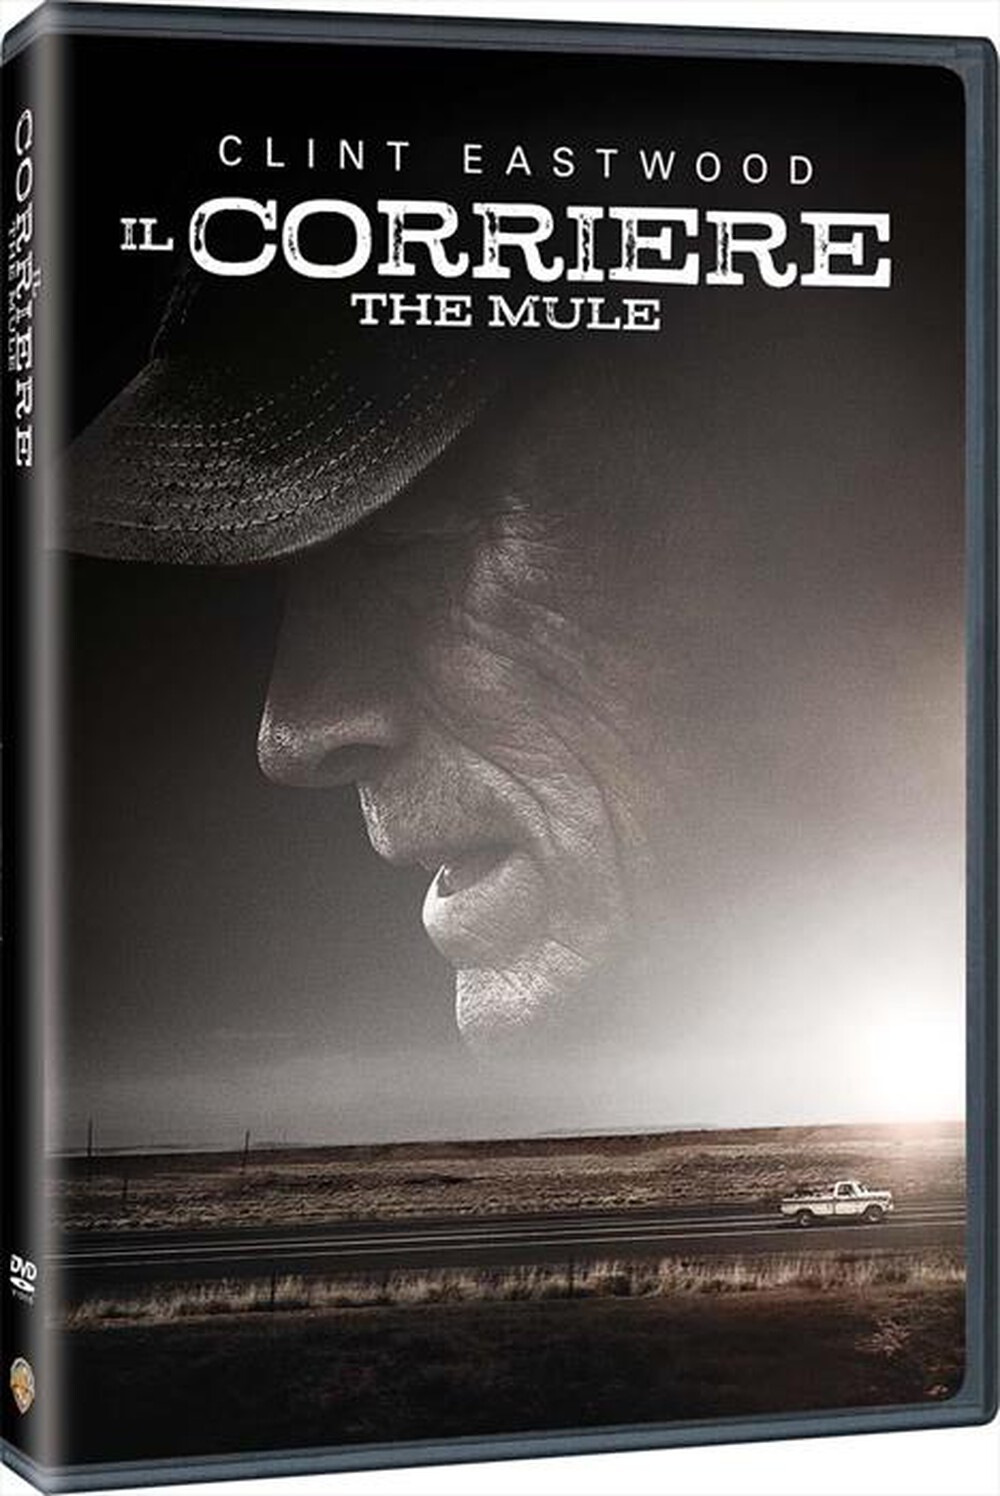 "WARNER HOME VIDEO - Corriere (Il) - The Mule"